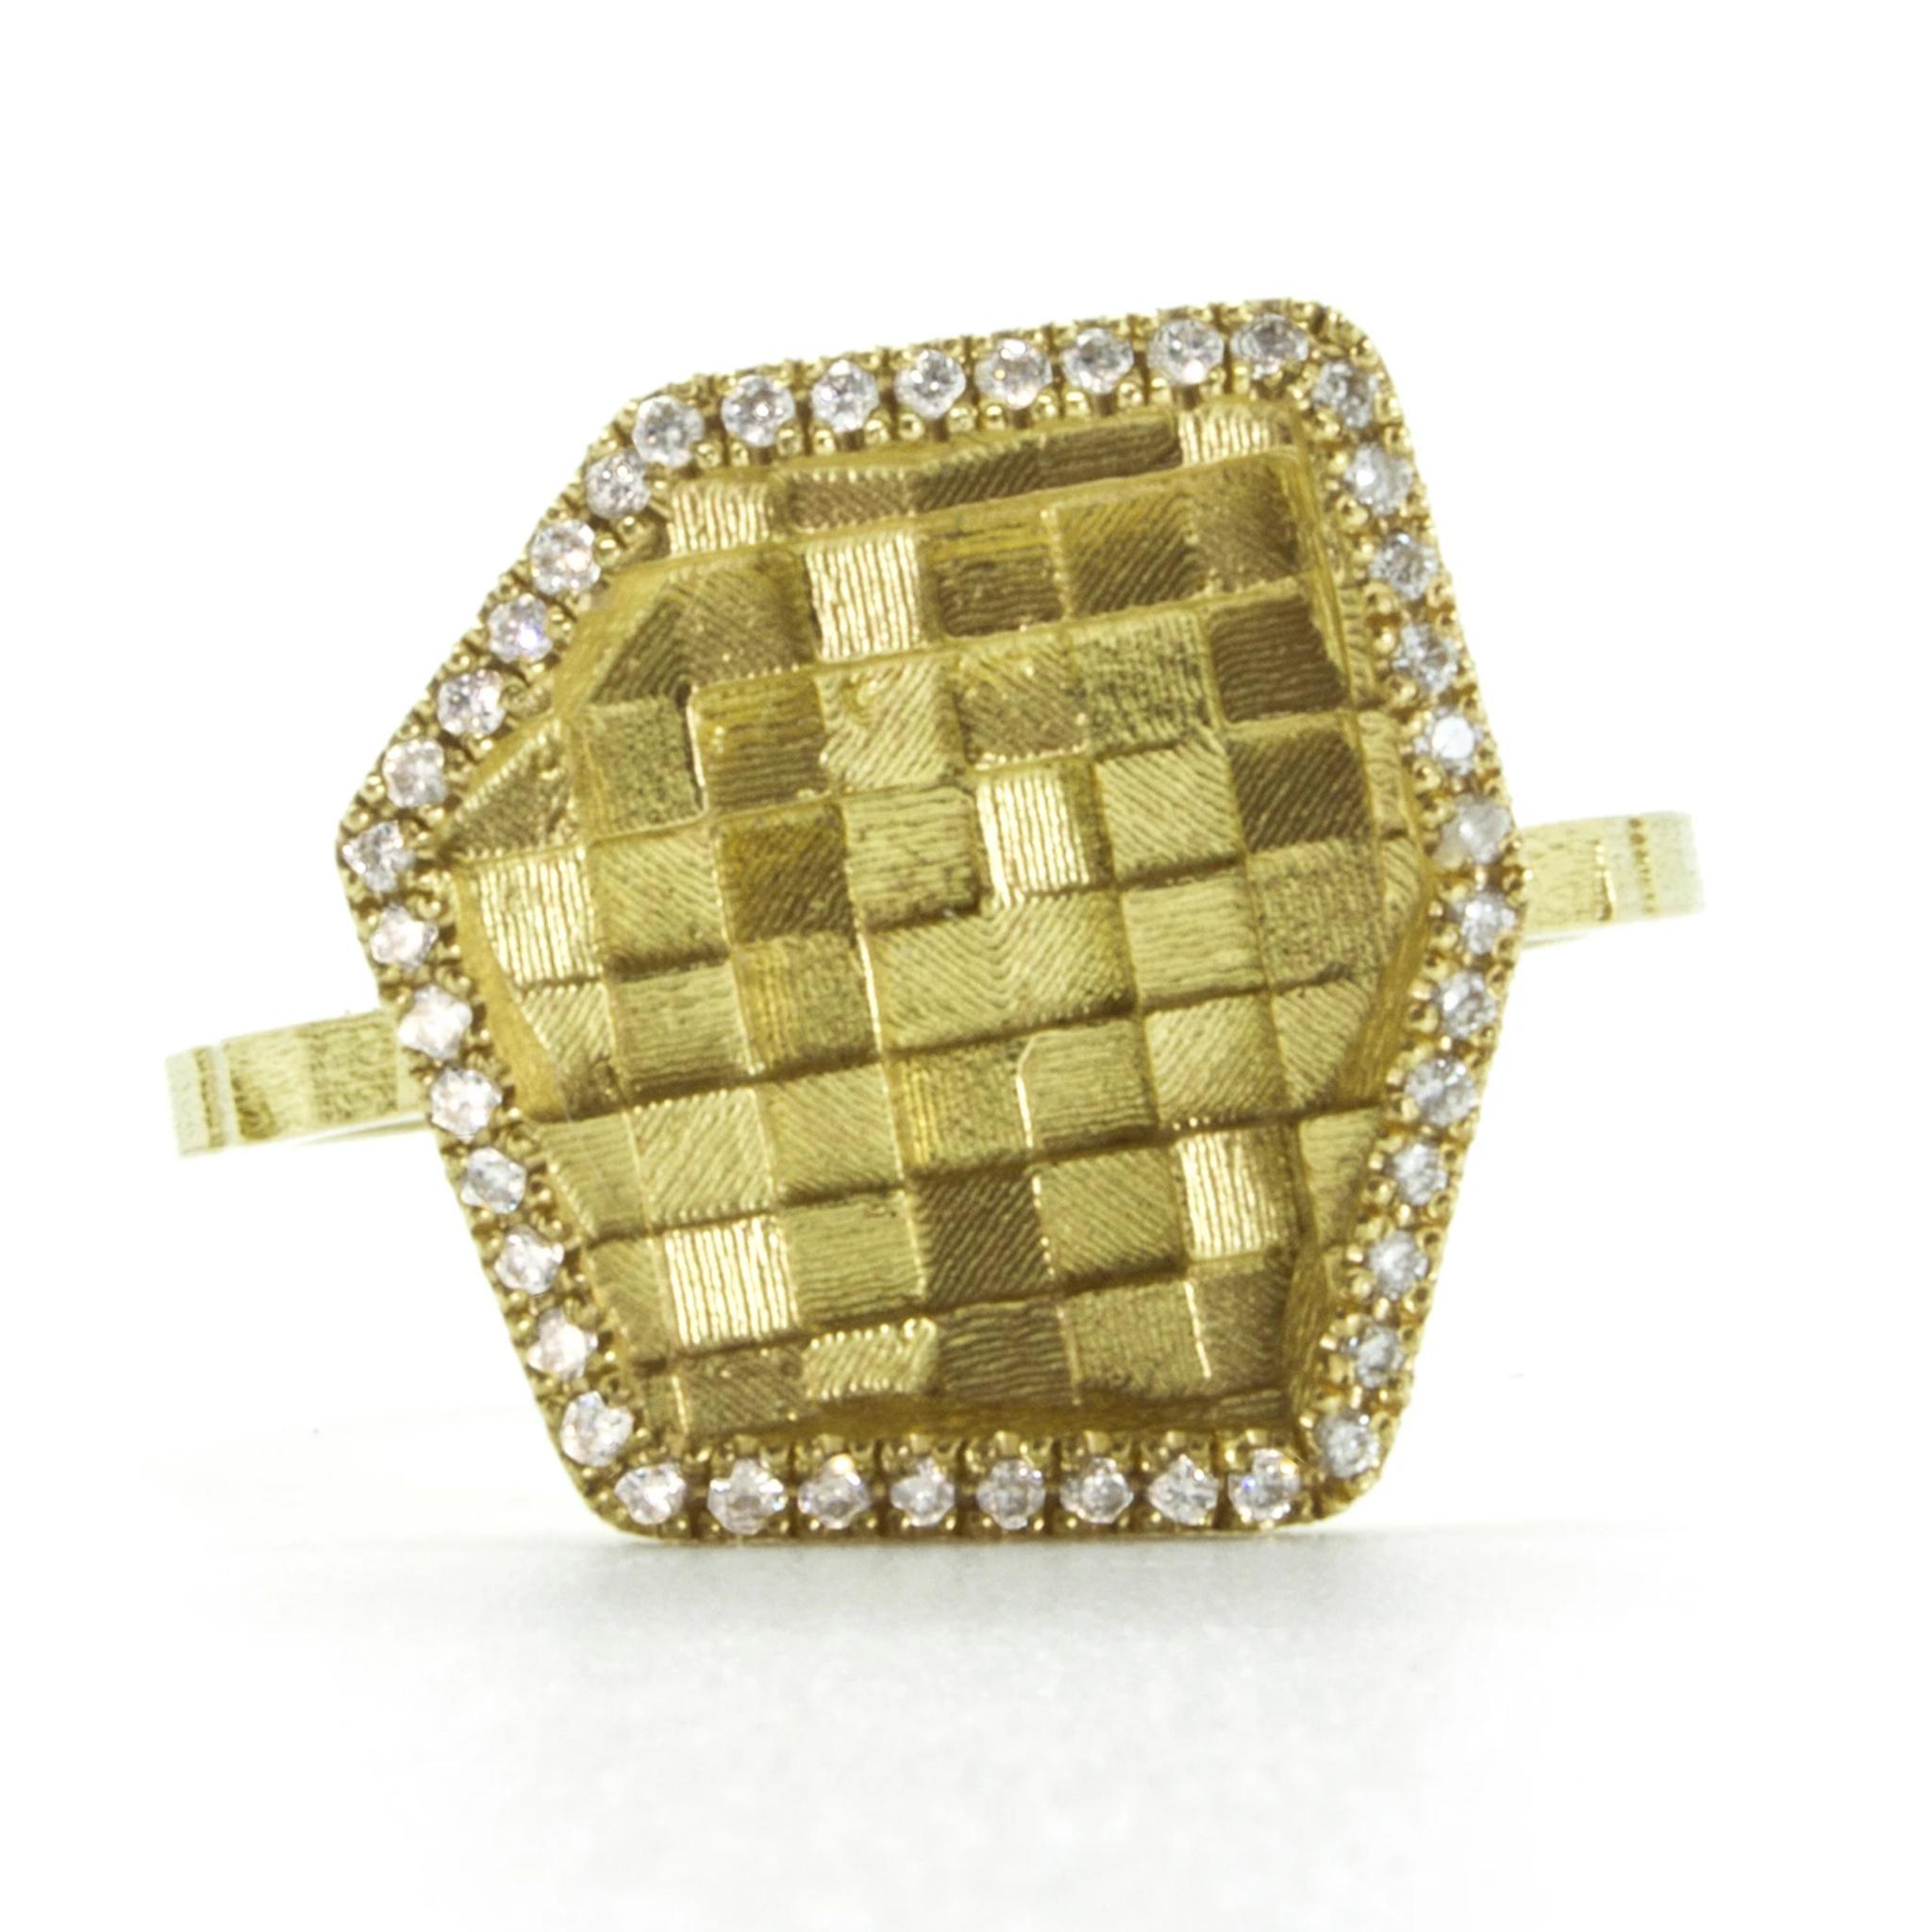 Hex Stratus Ring hand-fabricated in London by acclaimed jewelry maker Jo Hayes Ward showcasing an intricate platform of pixel elements fabricated with an optically-phenomenal reflective finish created through a combination of lost-wax and 3d